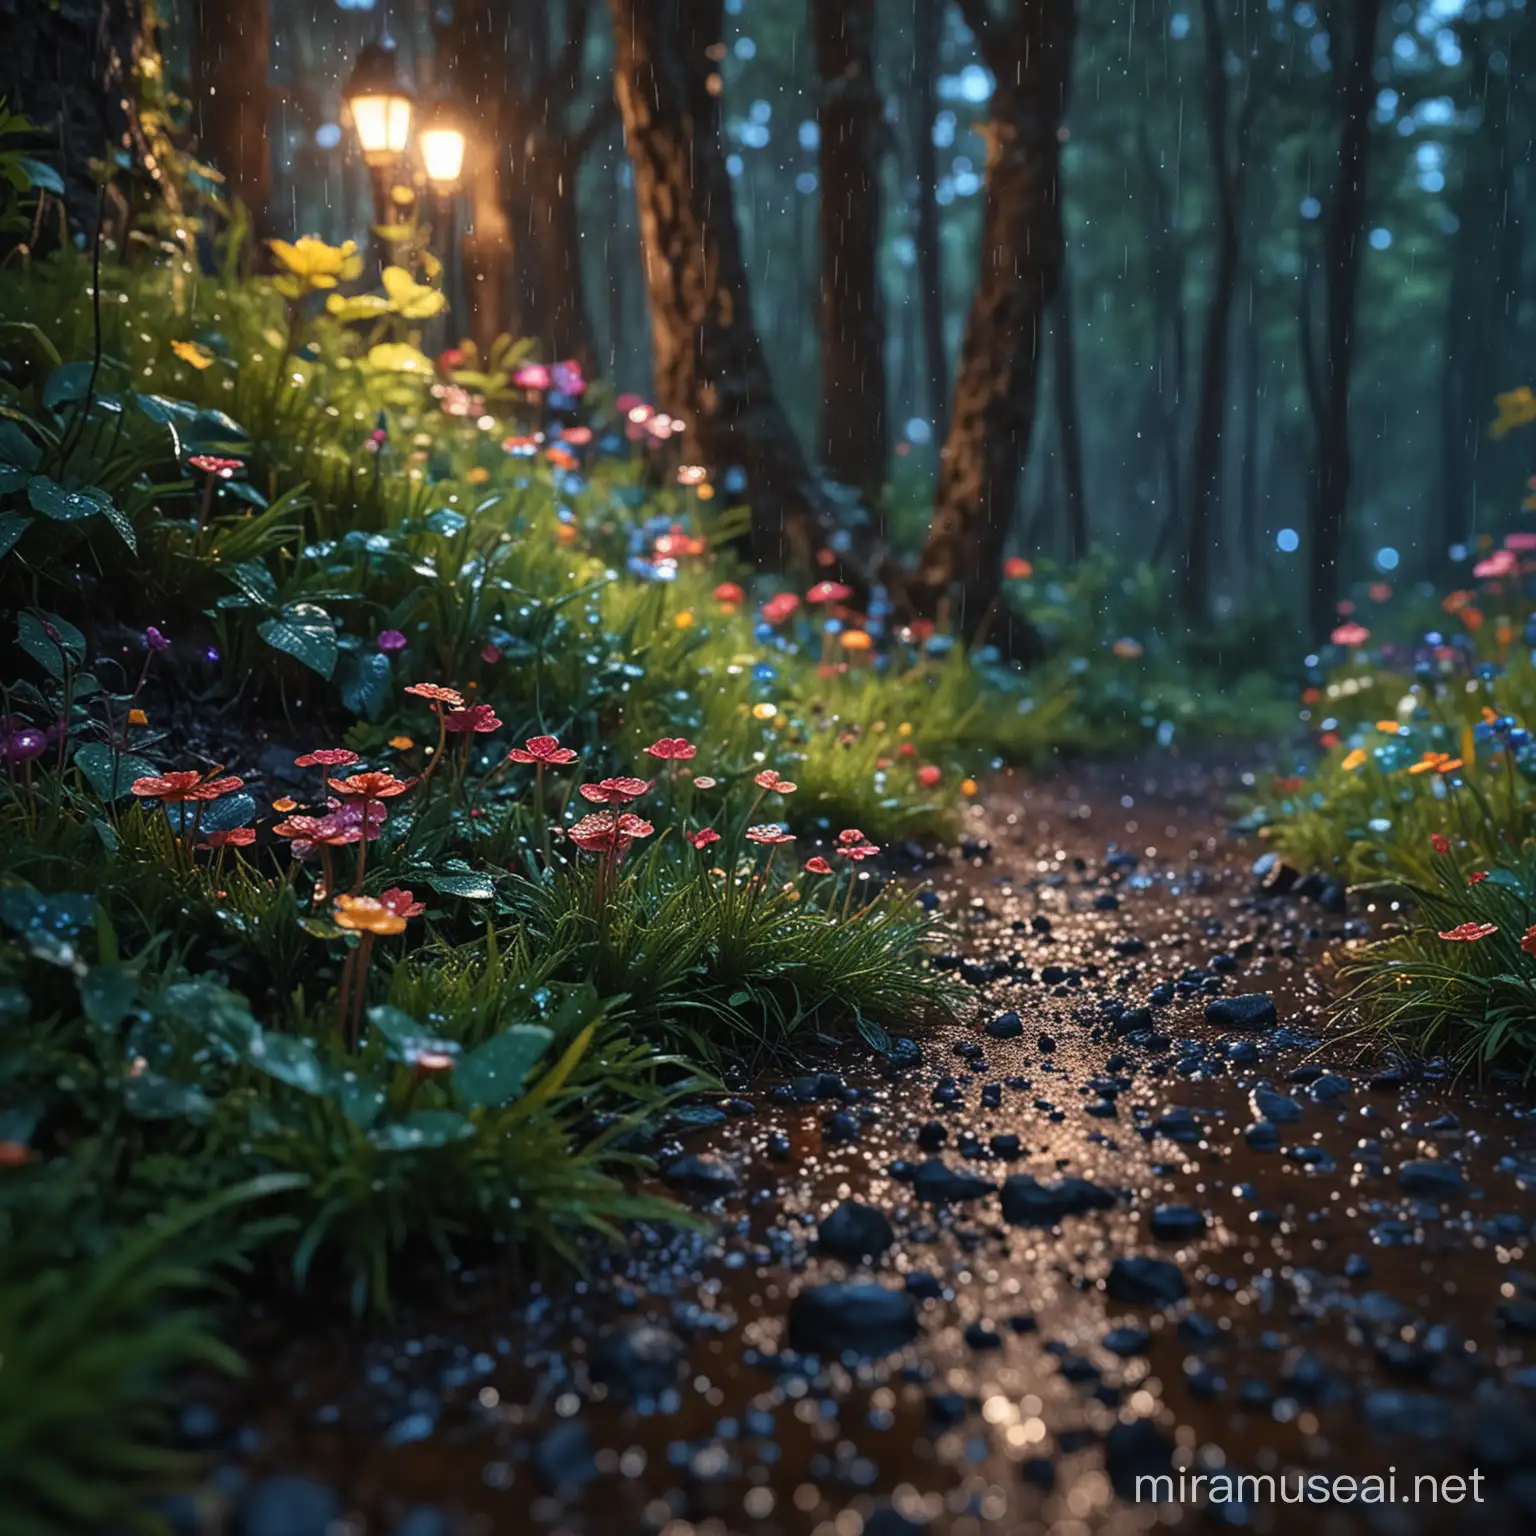 Enchanted Rainy Summer Night in a Vivid Fairy Forest